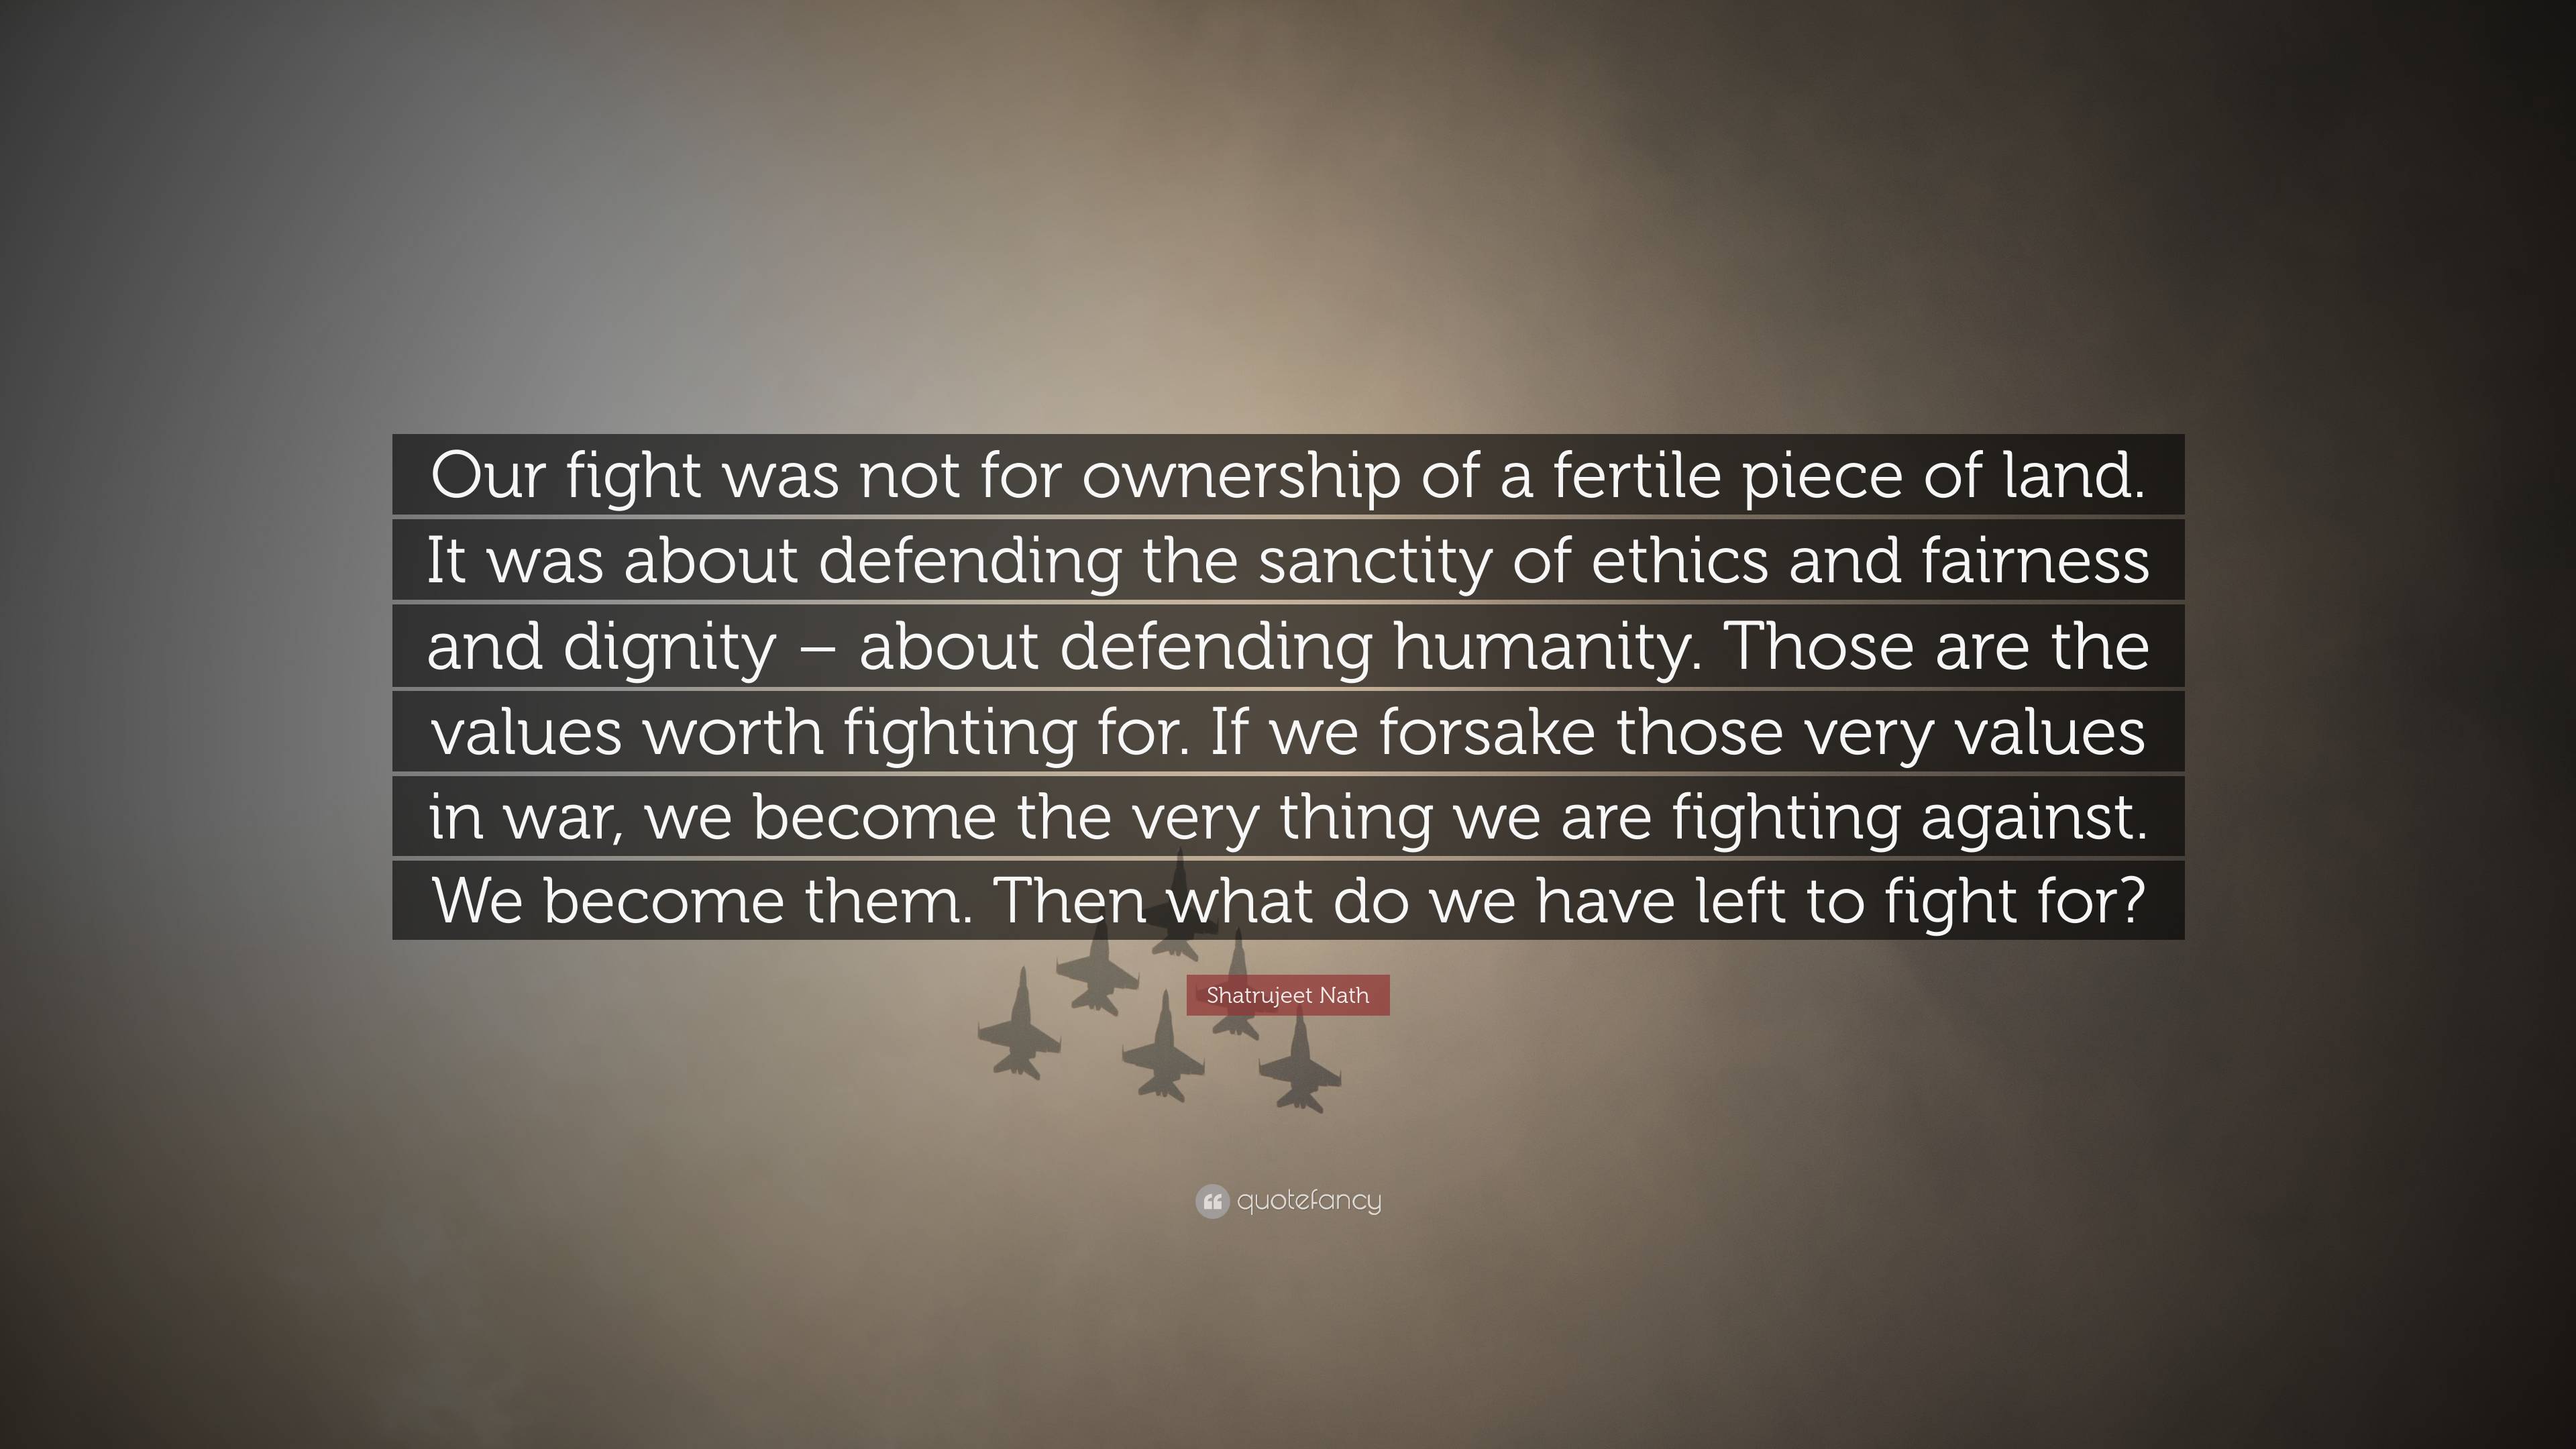 Shatrujeet Nath Quote: “Our fight was not for ownership of a fertile piece  of land. It was about defending the sanctity of ethics and fairness a”